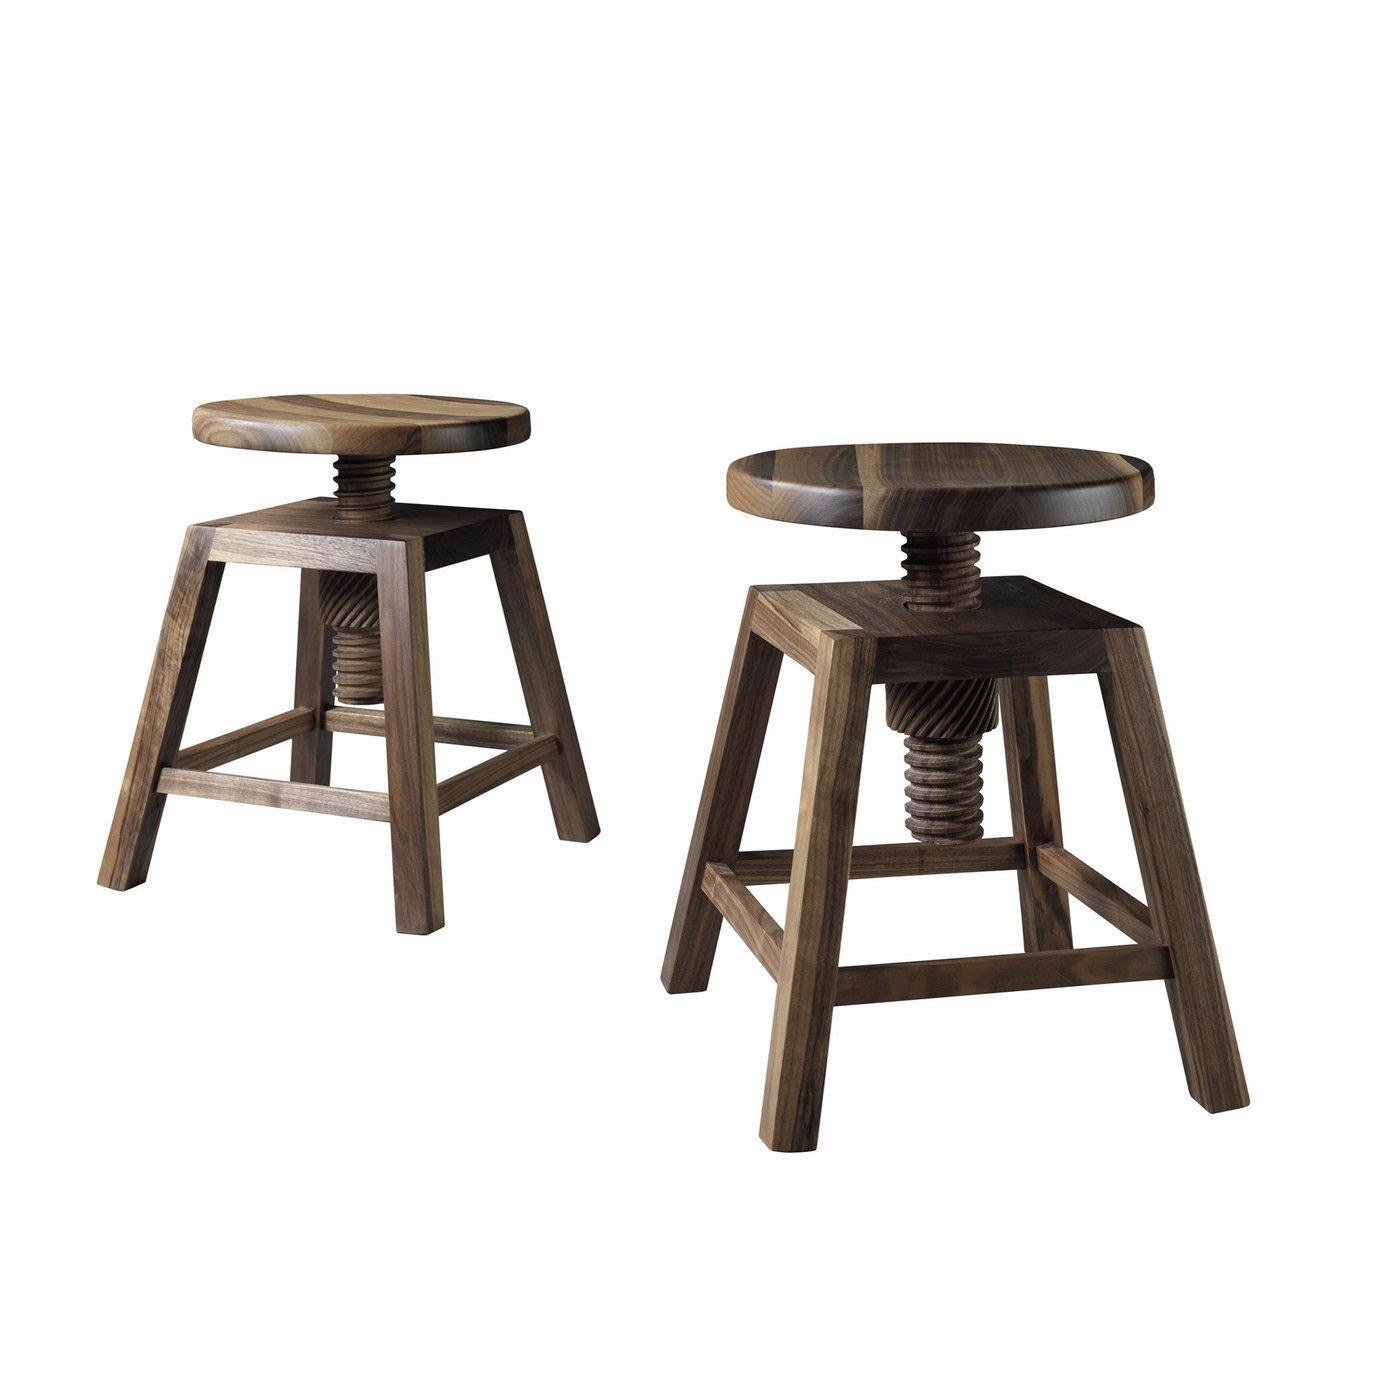 An exquisite wooden stool that puts a fresh twist on industrial-style seating, this piece offers a vintage, architectural look with a clean silhouette. Made of walnut with a natural finish that enhances its rich grain, this piece has a round swivel